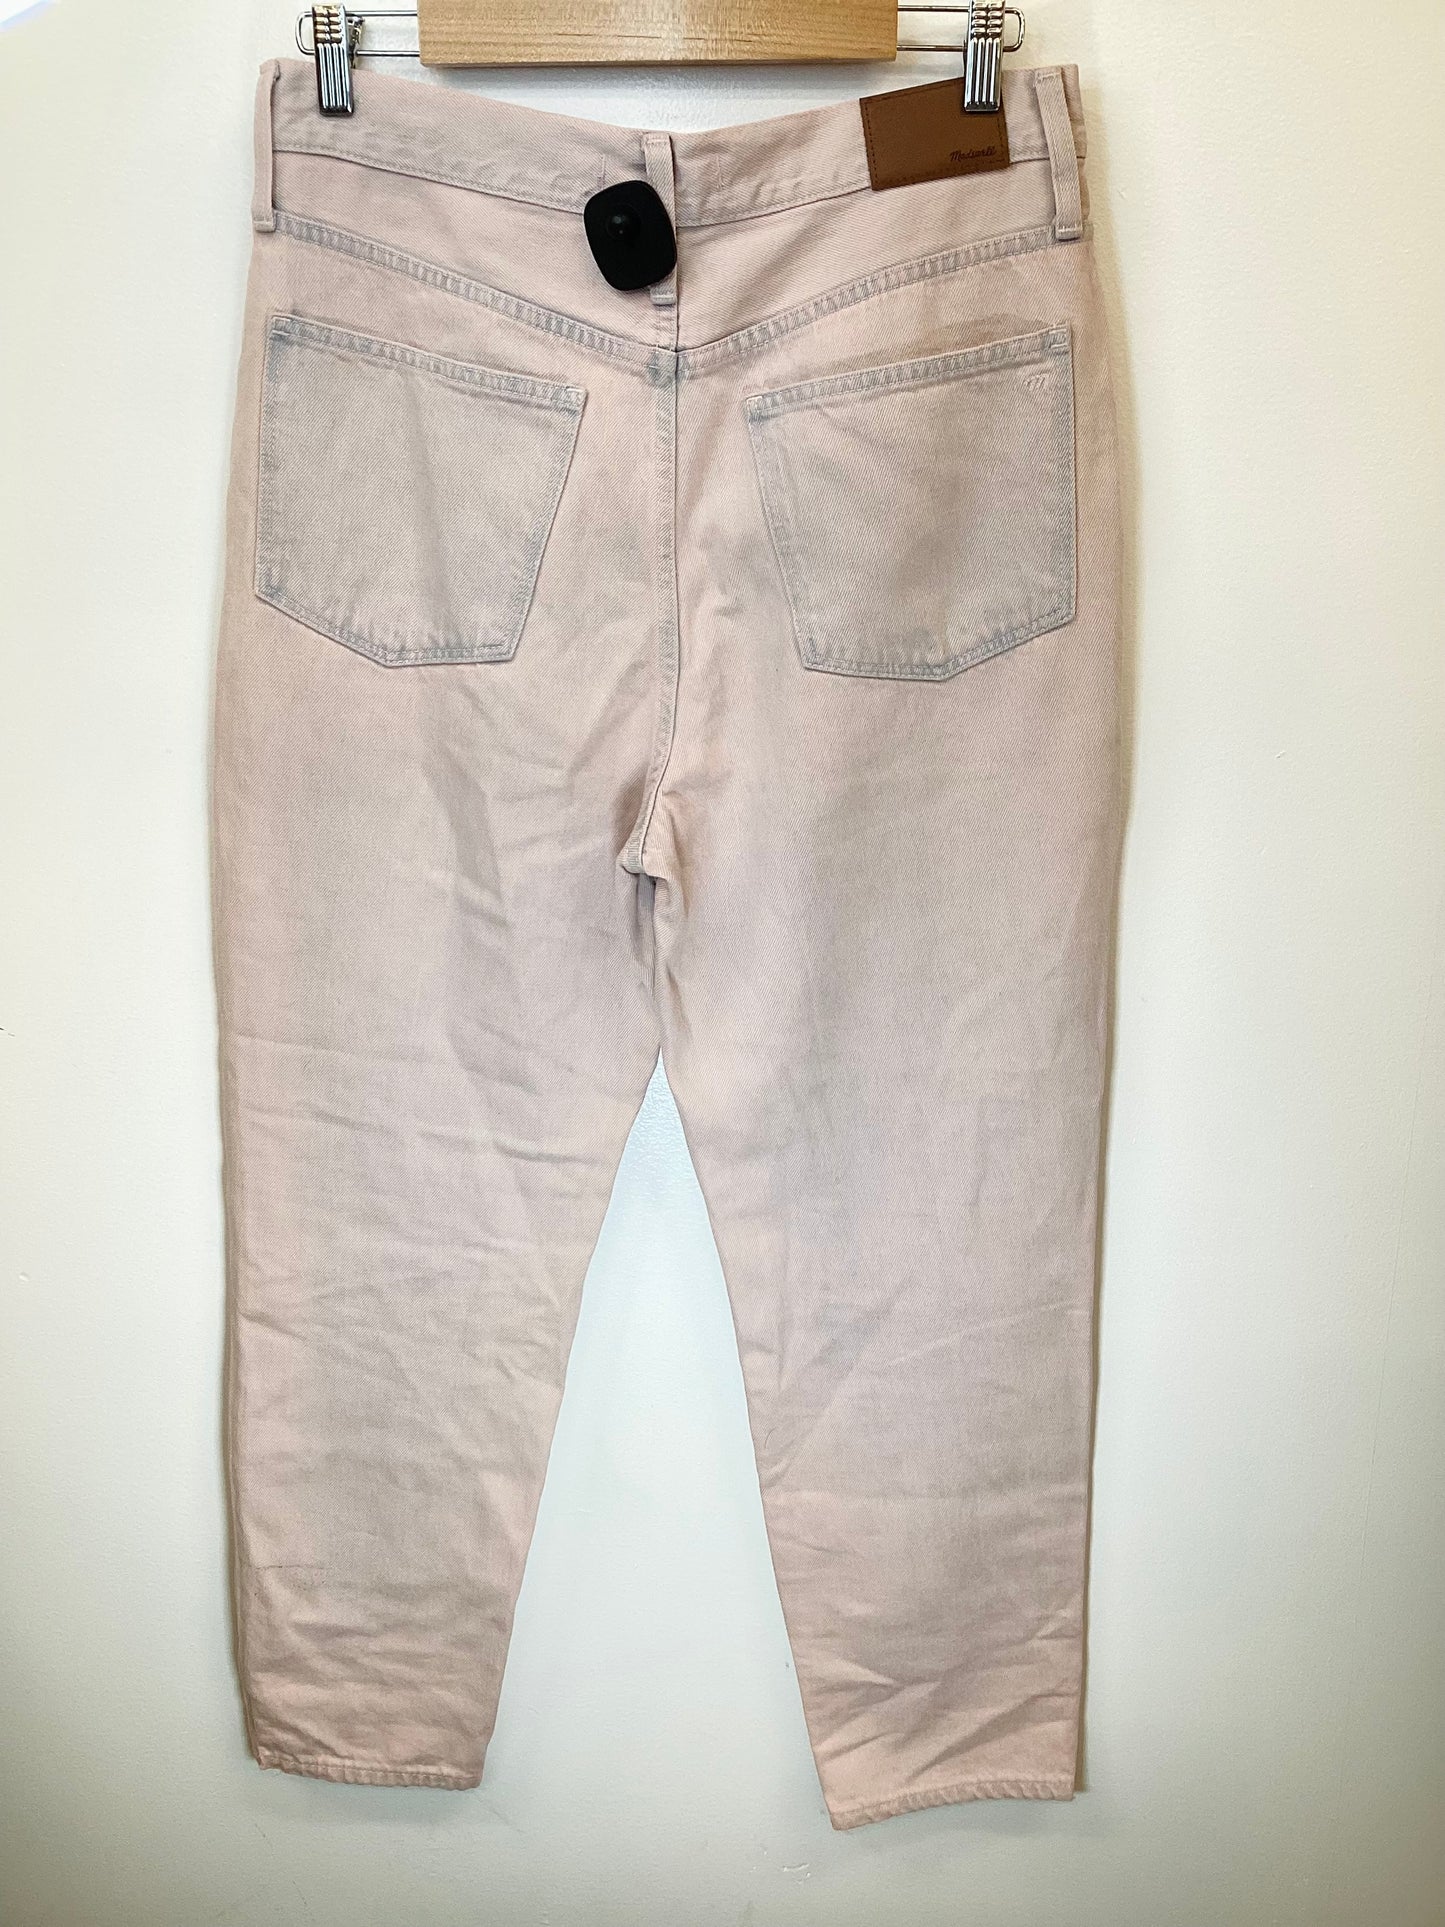 Jeans Relaxed/boyfriend By Madewell  Size: 8